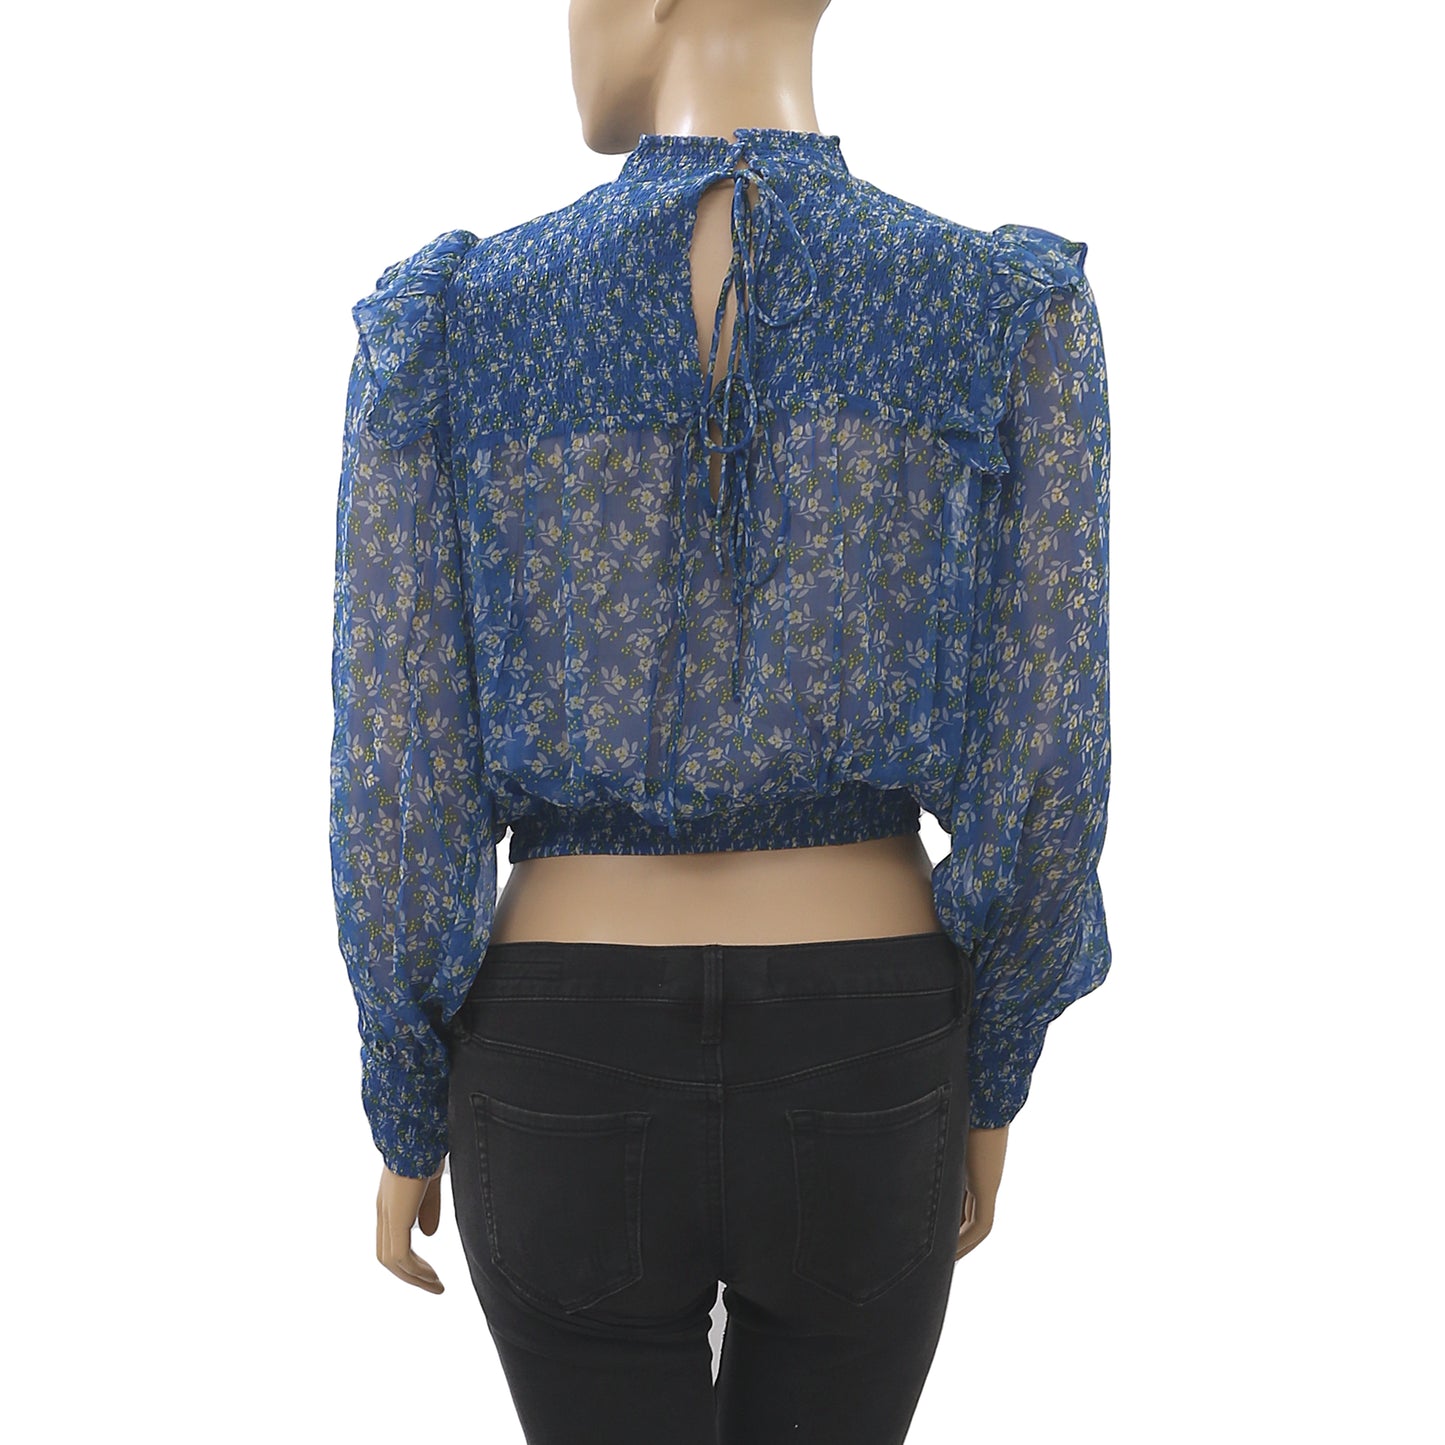 Free People Roma Floral-Printed Blouse Top